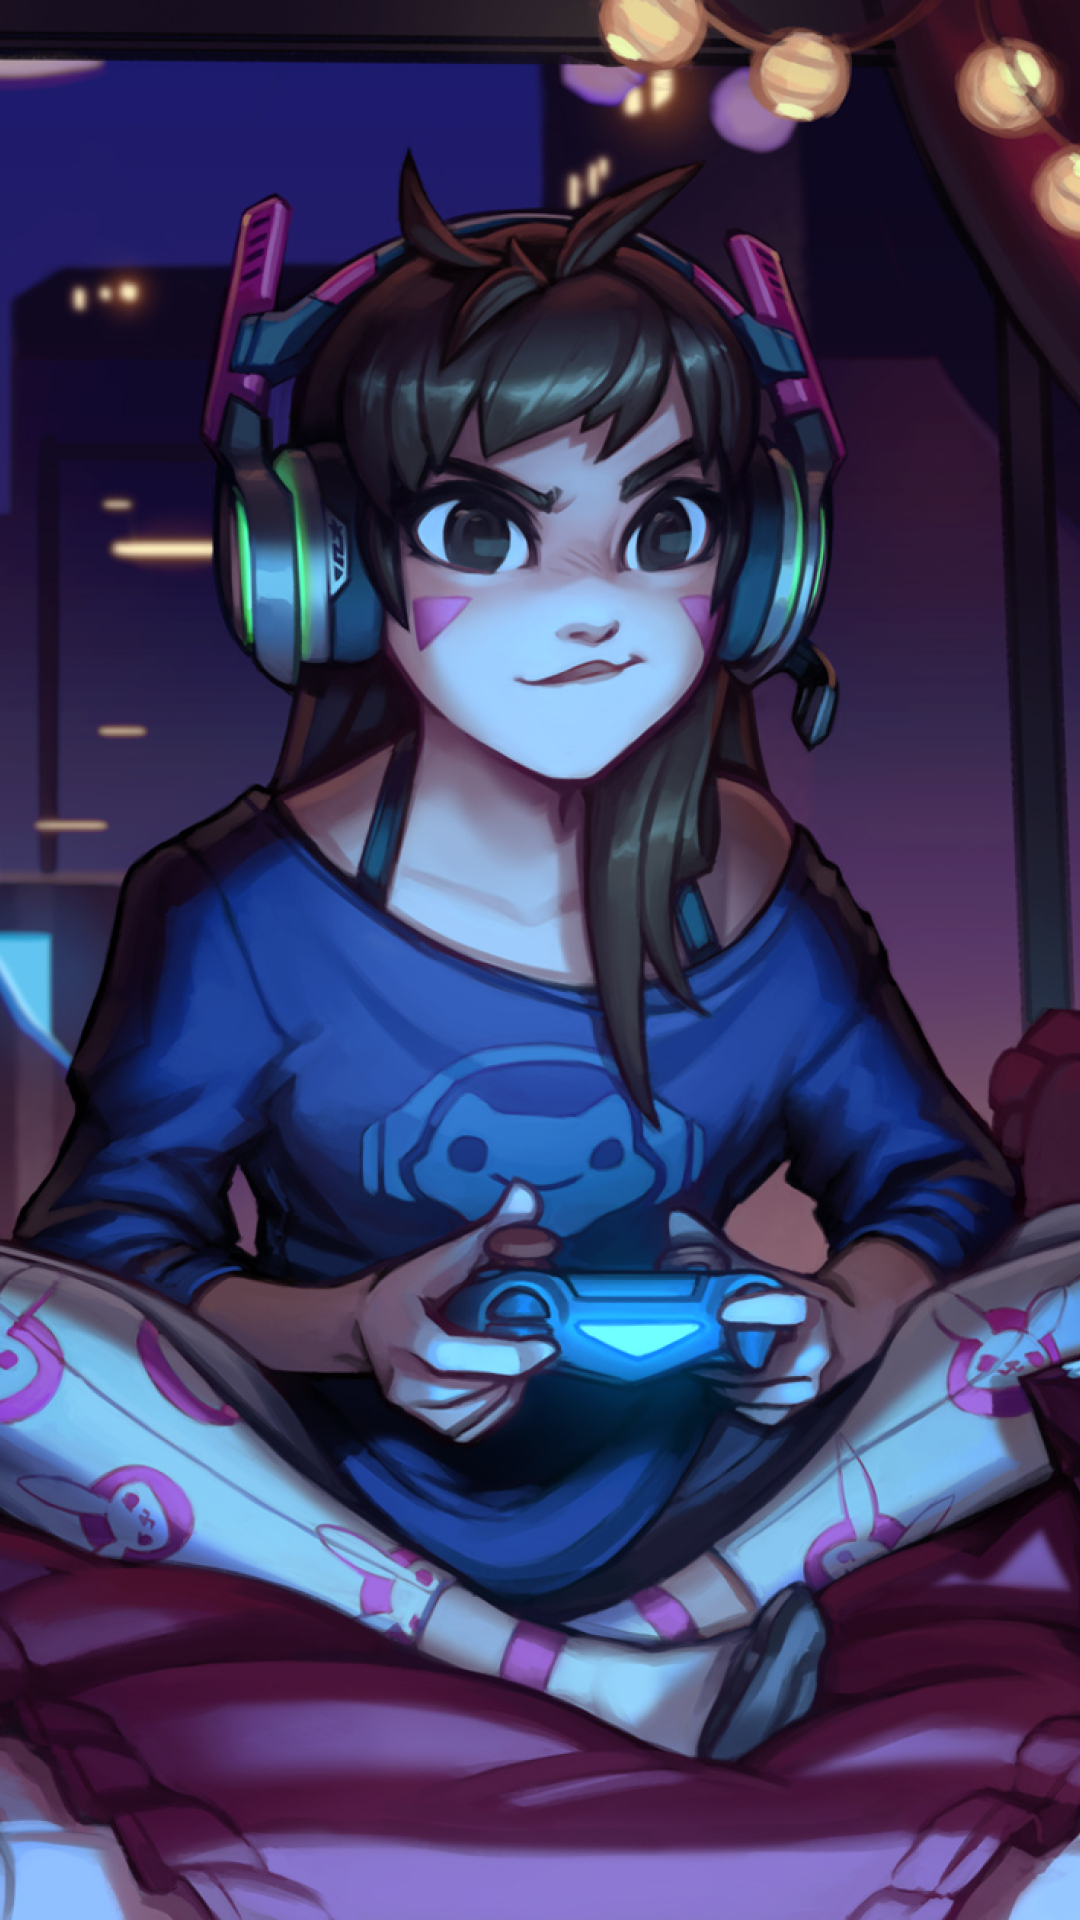 1080x1920 Dva Overwatch Cute Artwork Iphone 7, 6s, 6 Plus and Pixel XL ,One Plus 3, 3t, 5 ...